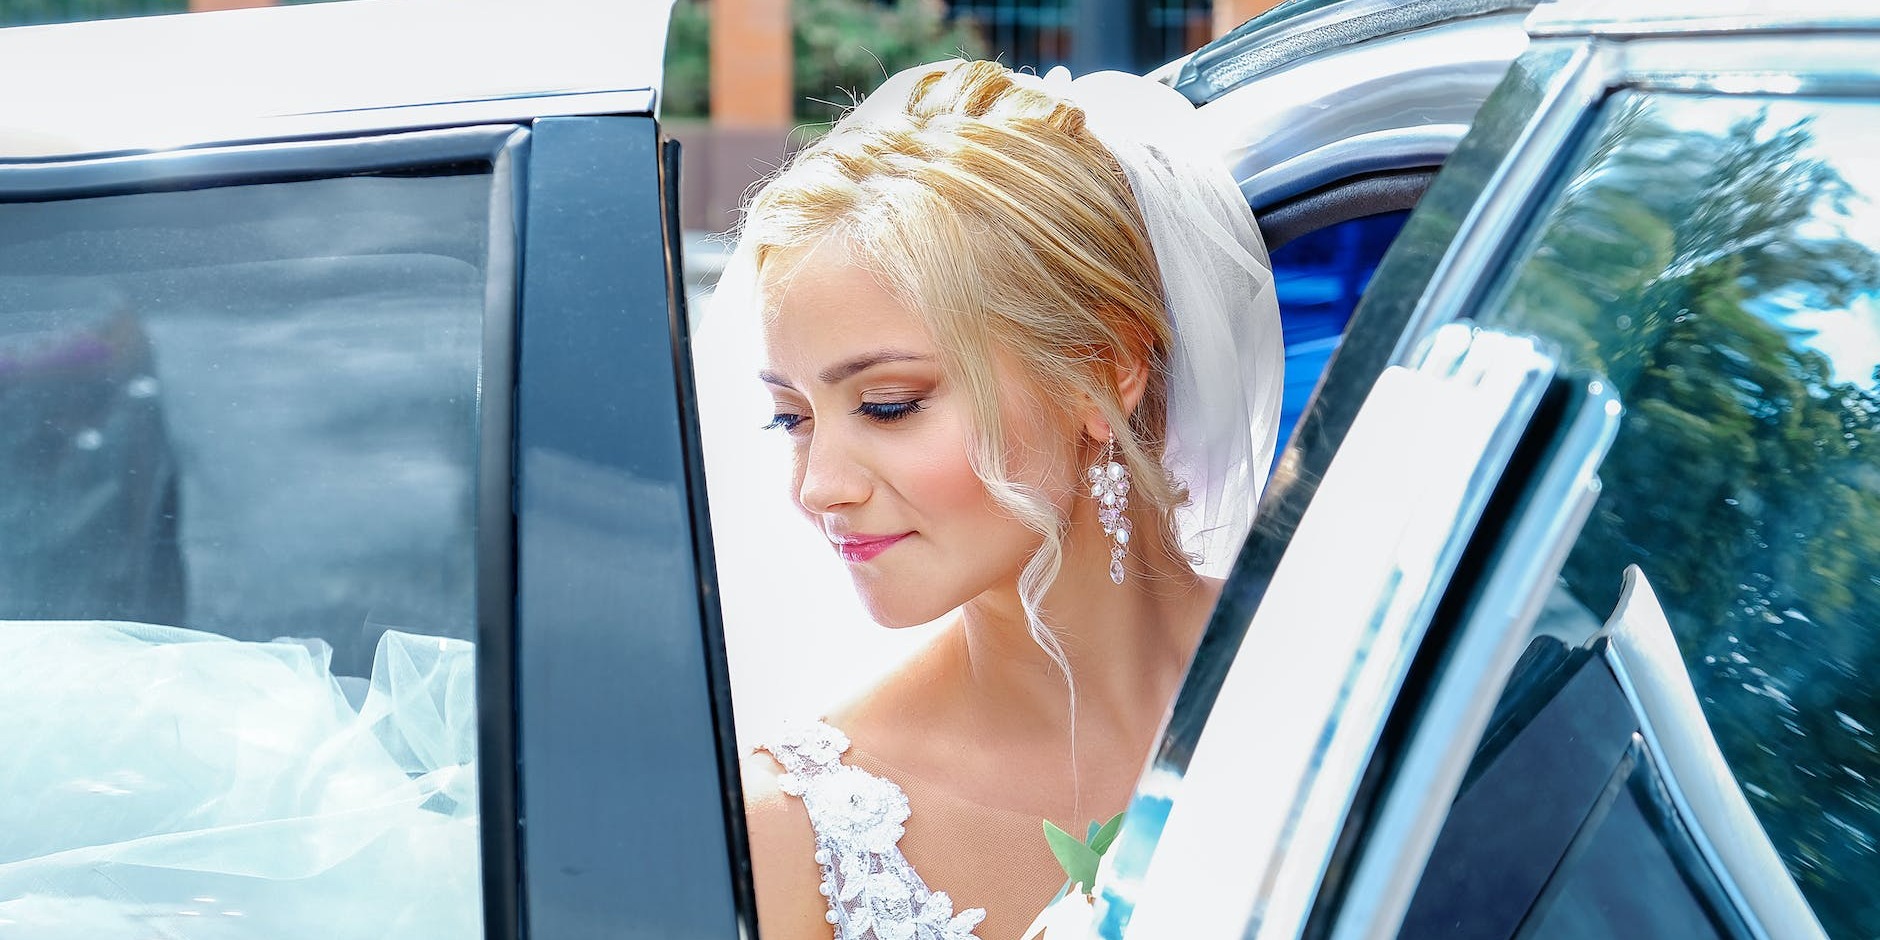 What Makes the Mercedes S-Class the Ultimate Choice for UK Wedding Car Hire?